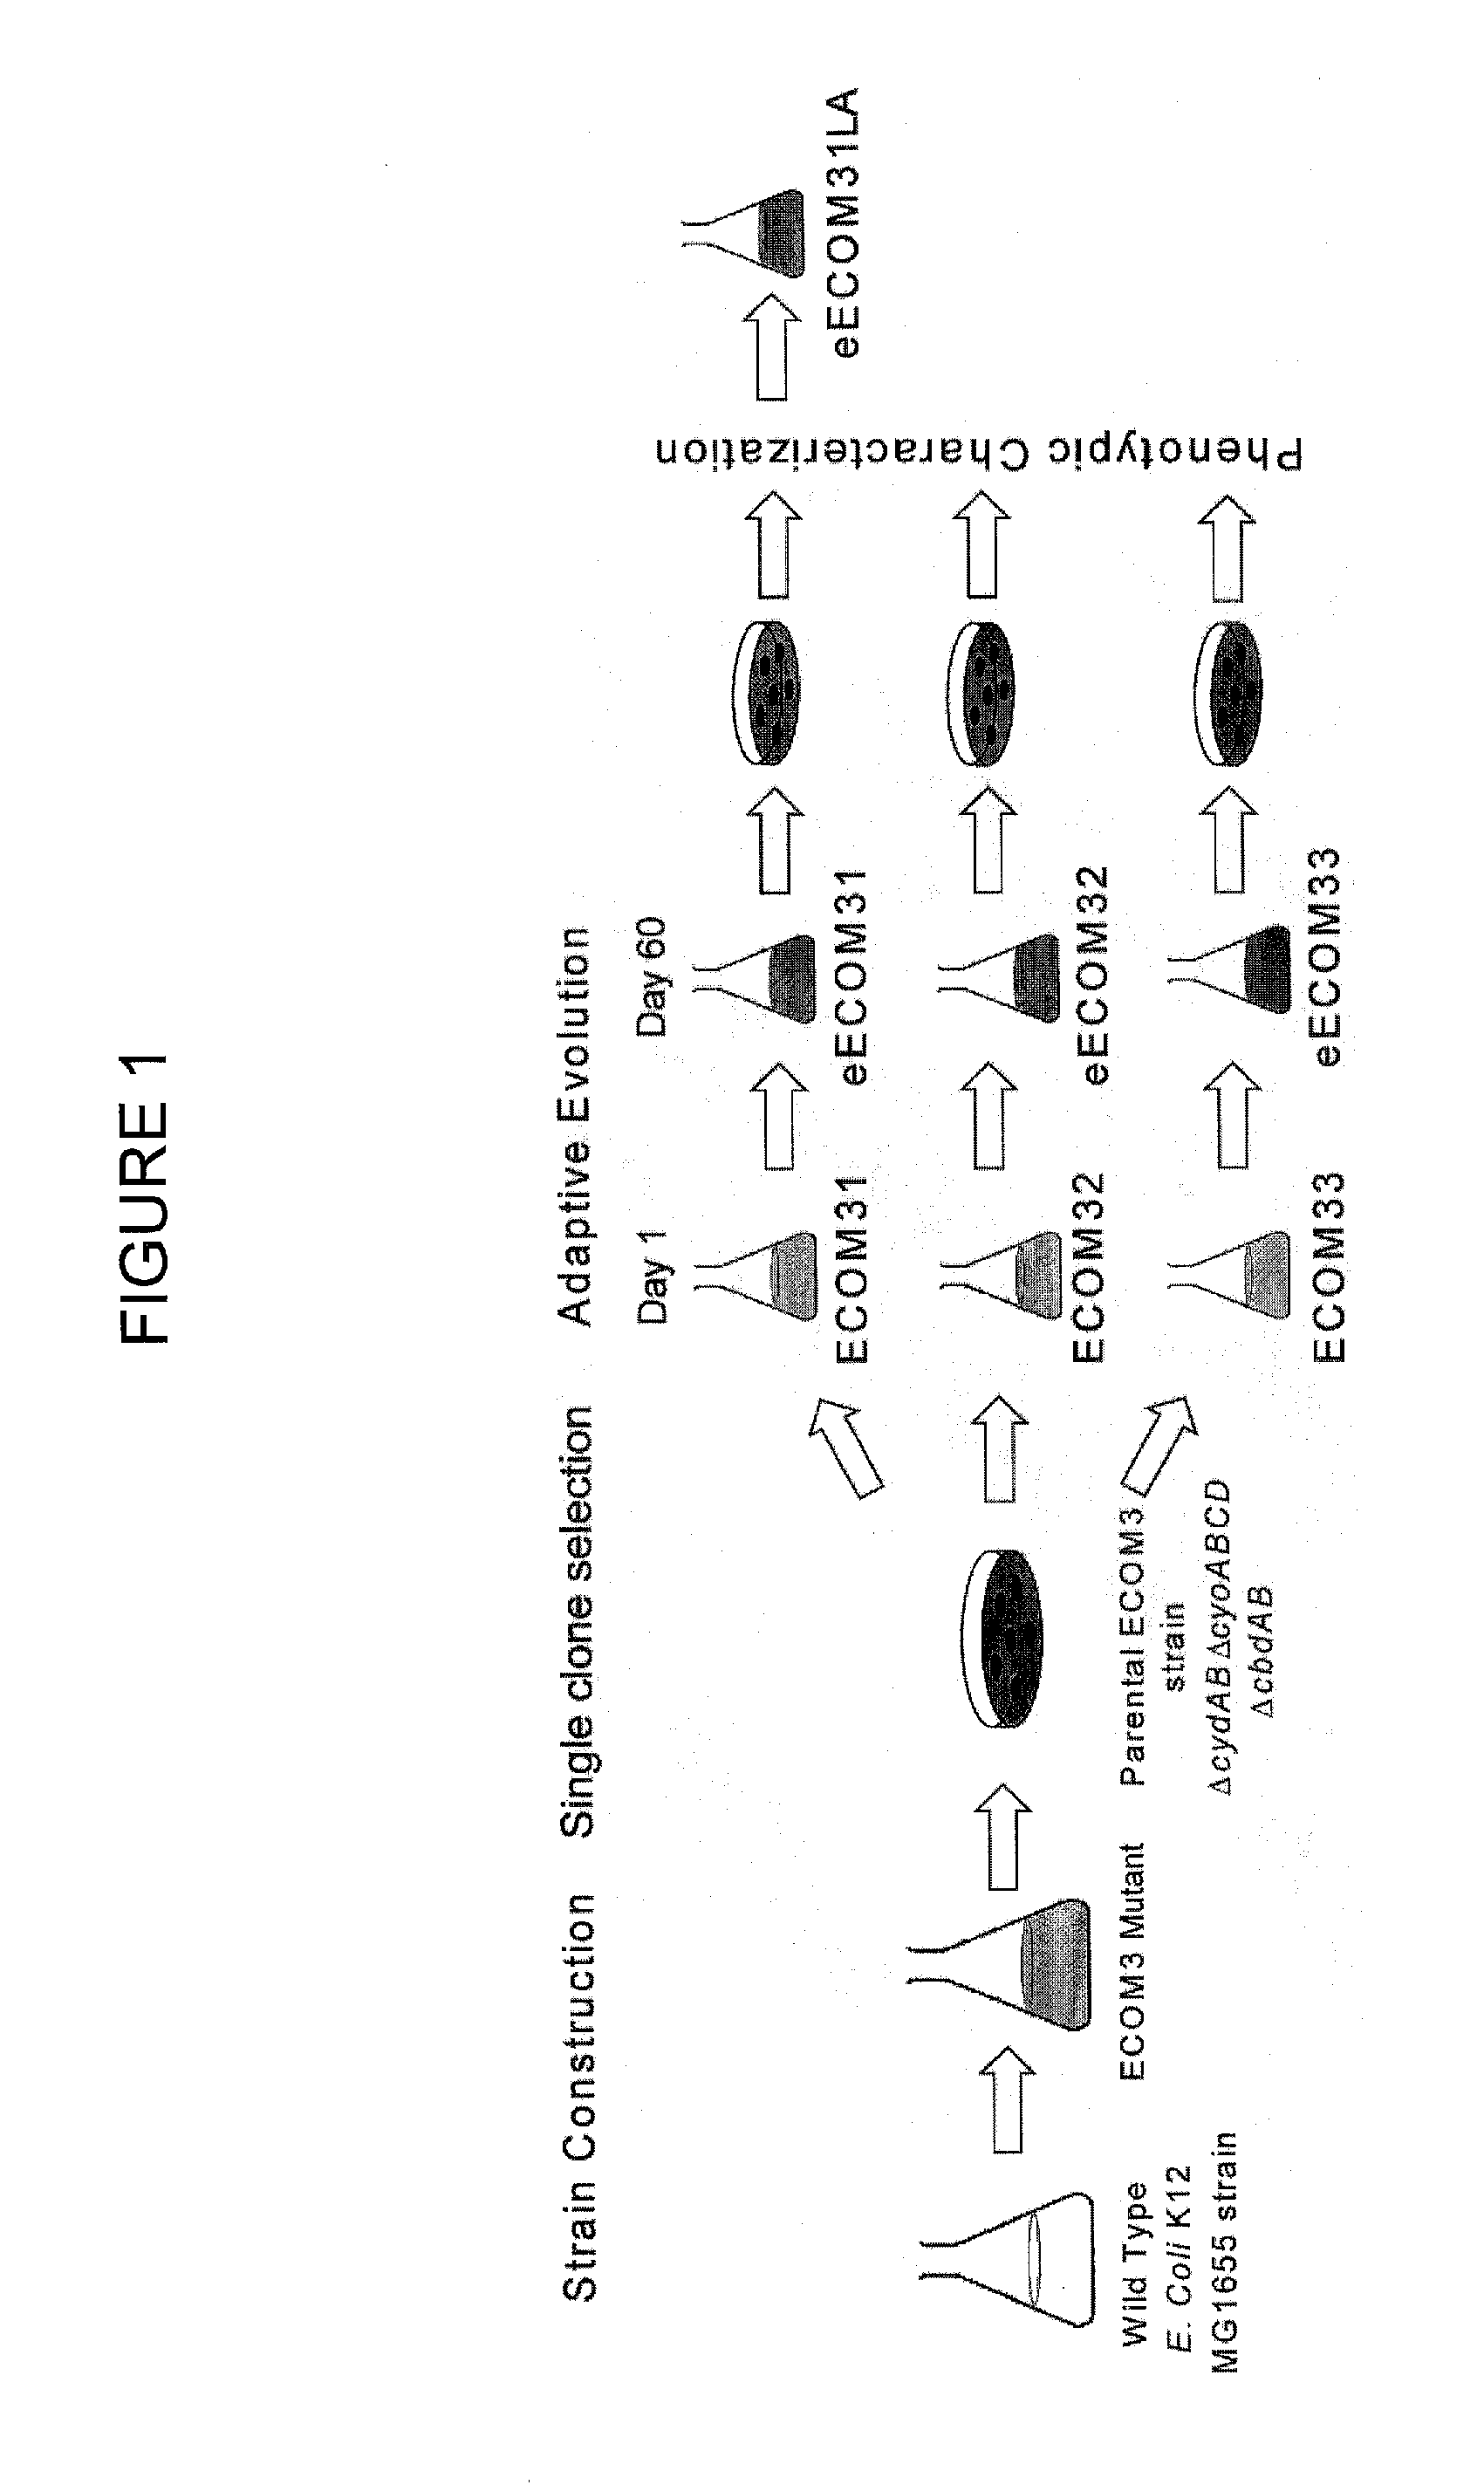 Escherichia coli metabolic engineering oxygen independent platform strains and methods of use thereof